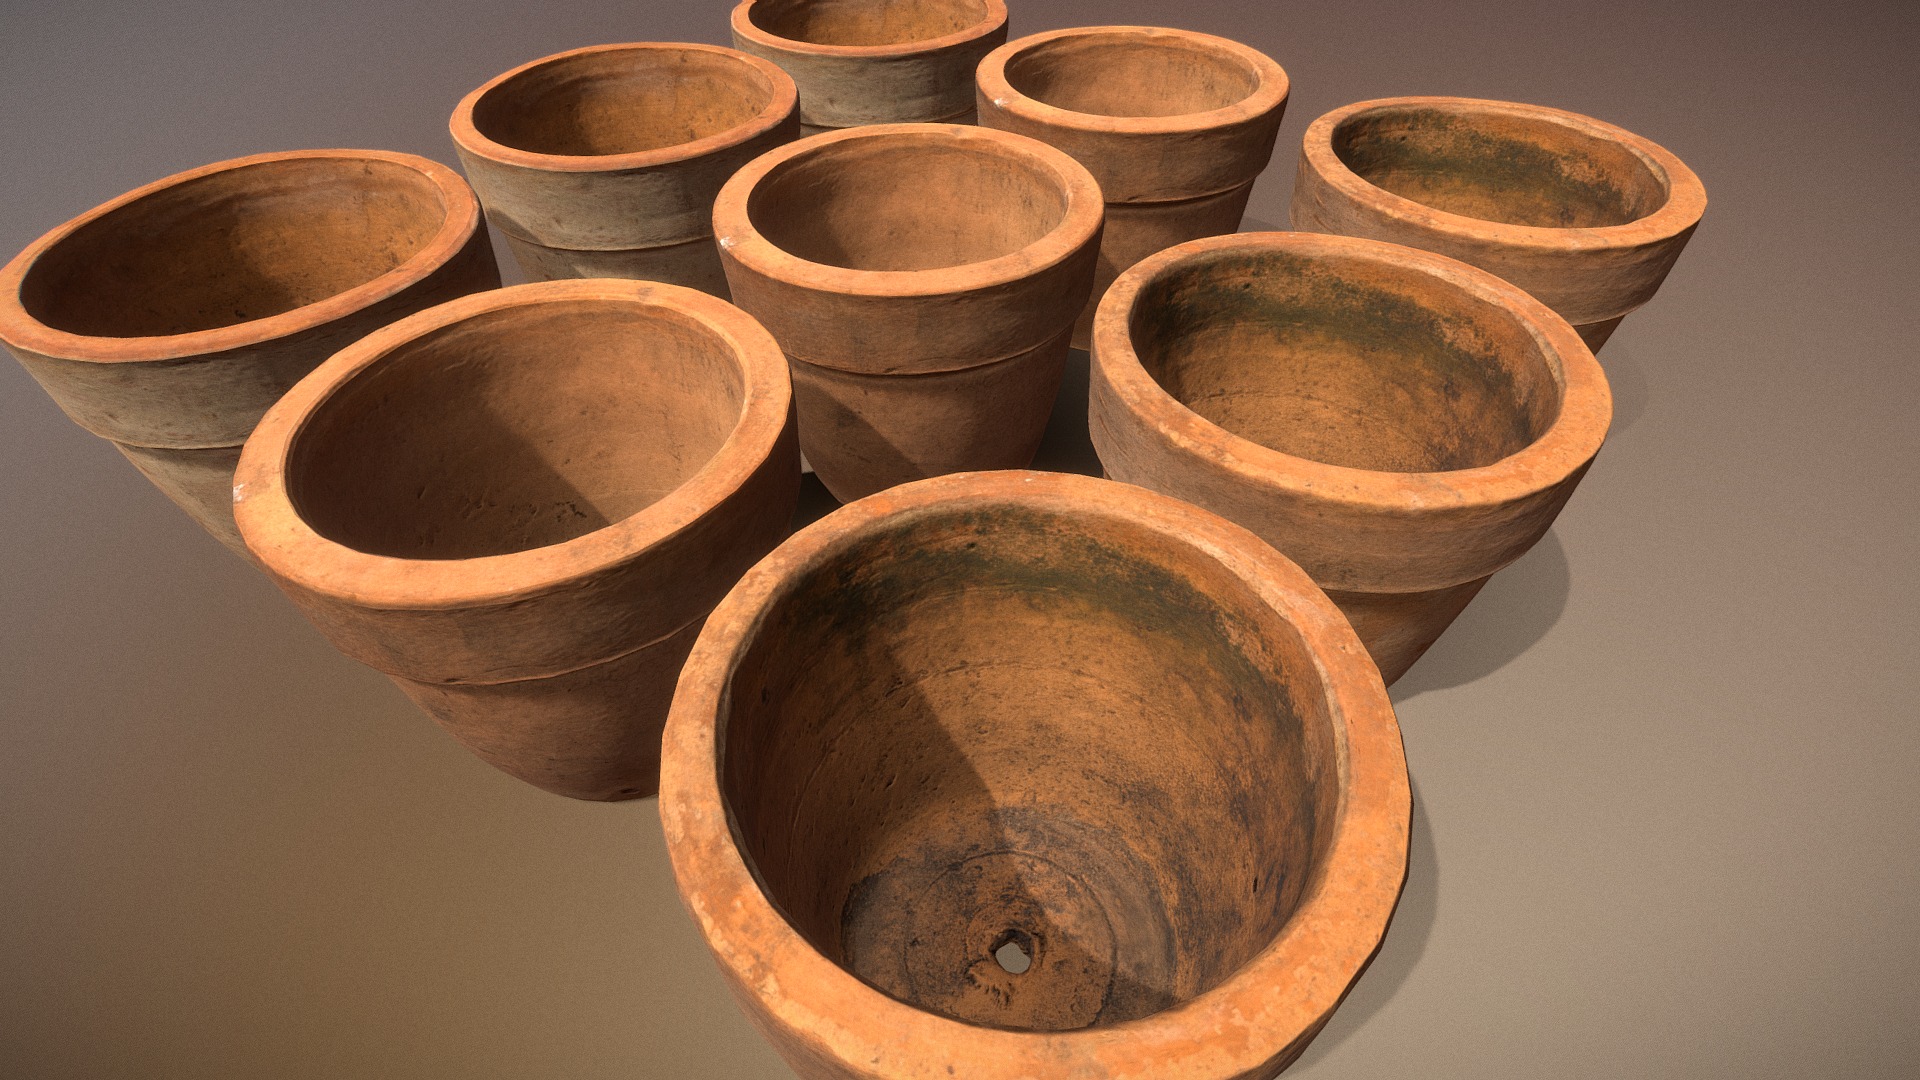 3D model Three Clay Pots - This is a 3D model of the Three Clay Pots. The 3D model is about a group of round wooden pots.